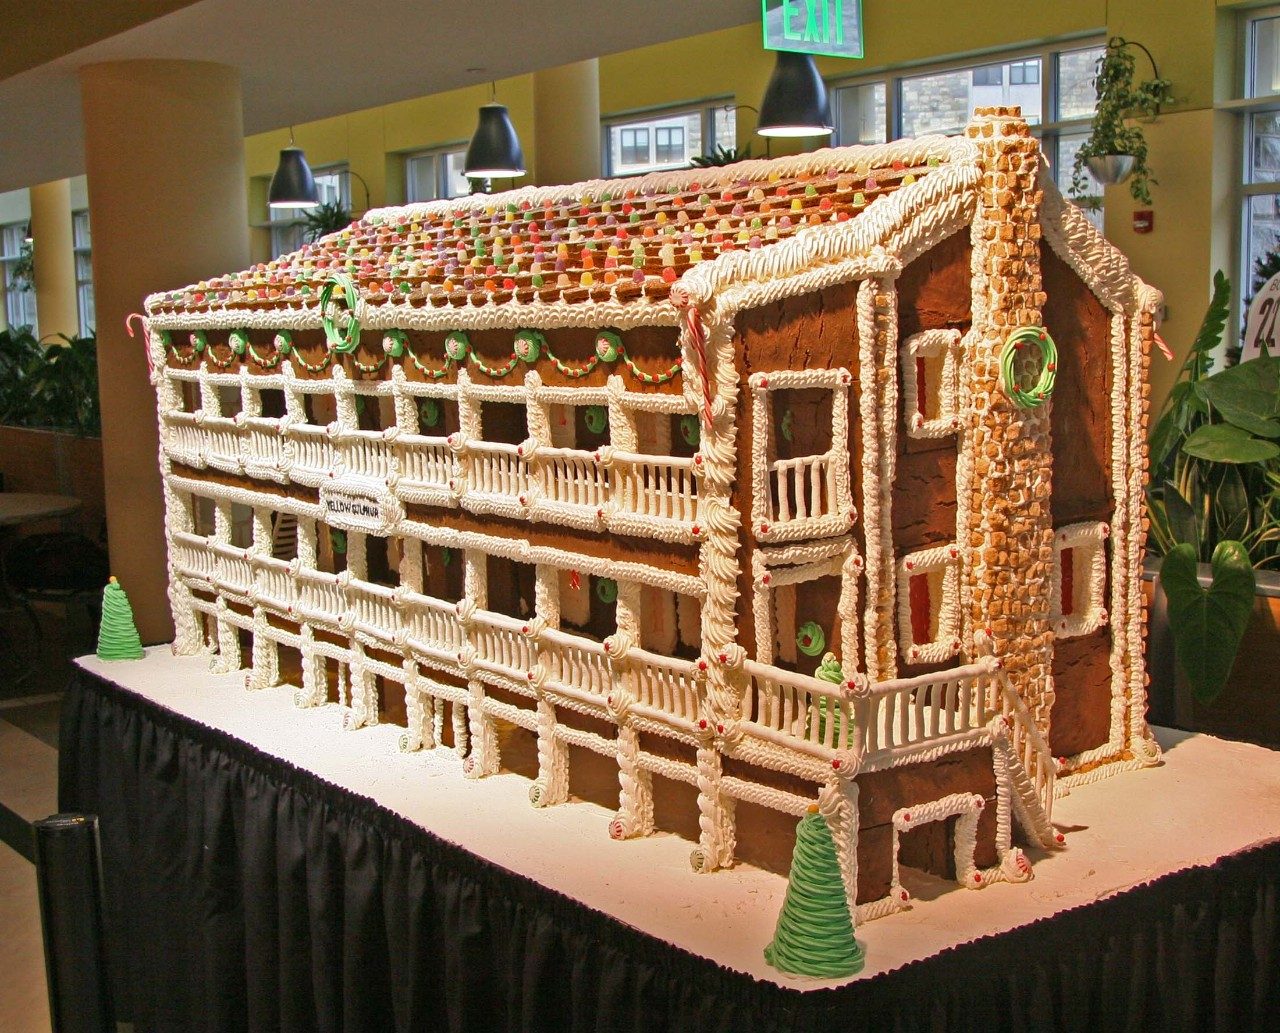 Virginia Tech's West End Market's holiday decor is a gingerbread-replica of Yellow Sulphur Springs, a historic inn in Southwest Virginia. The gingerbread hotel weighs close to 400 pounds.